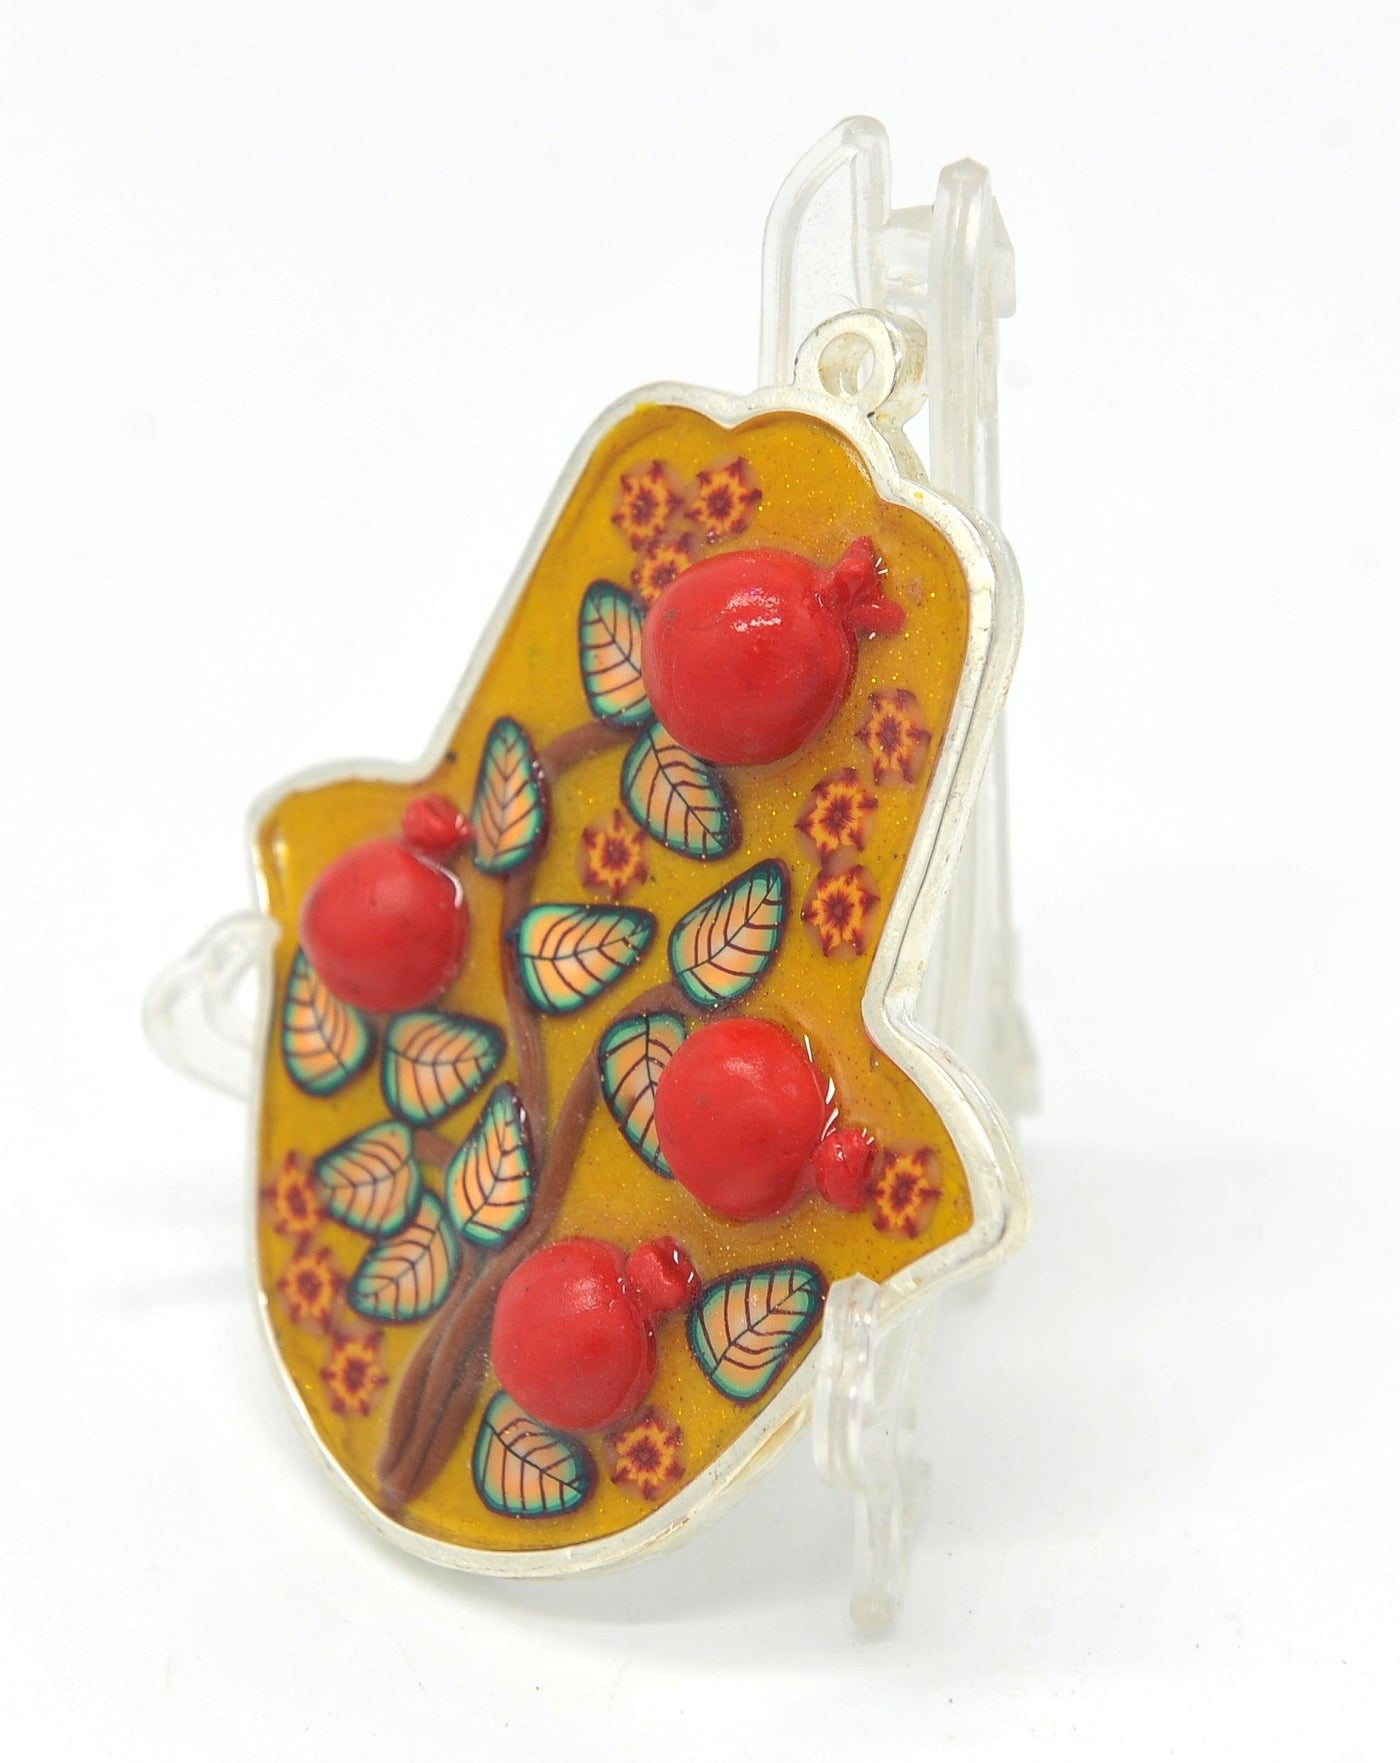 Hamsa Hand Fimo Blessings figure for Home Blessing Wall Hanging #14 - Spring Nahal